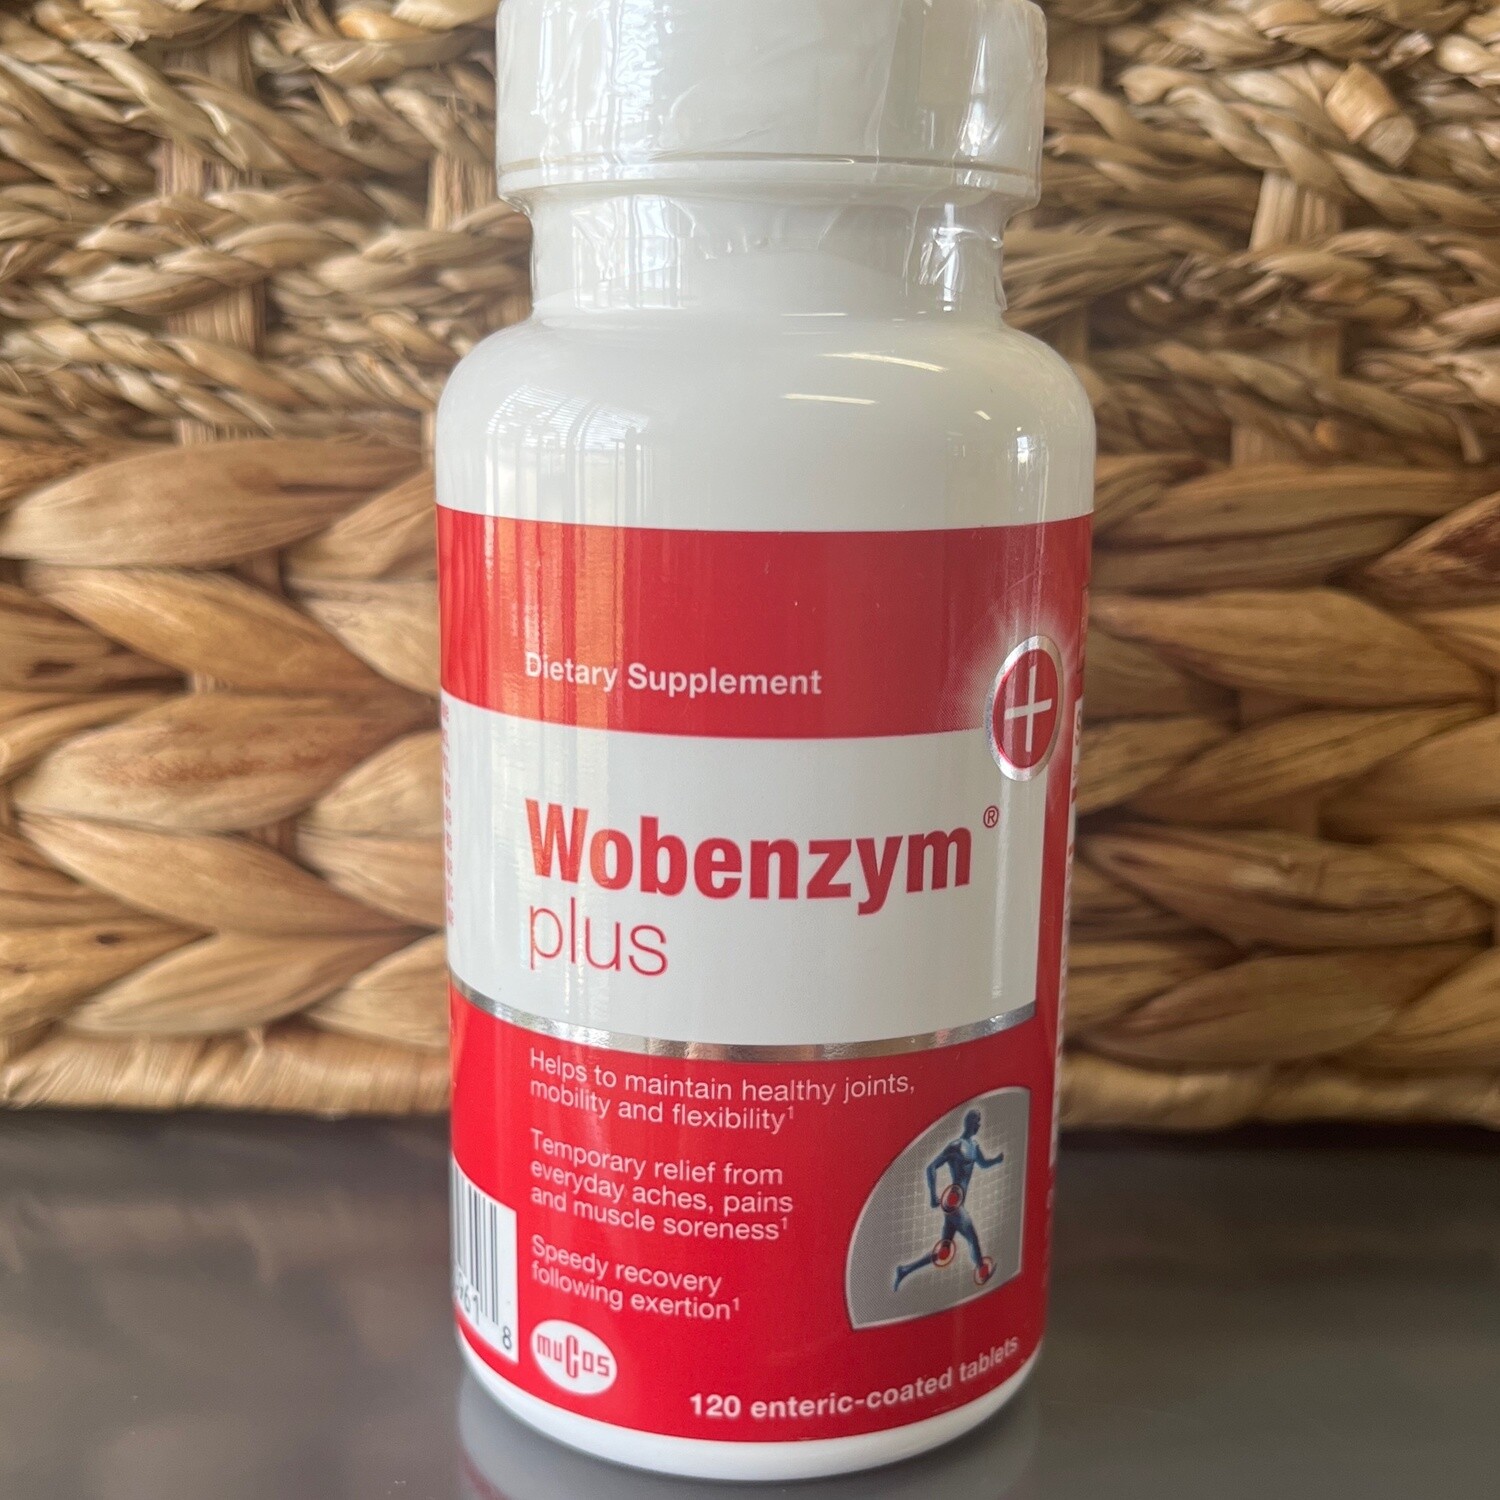 Wobenzym Plus - Supports Joint Function, Muscles and Recovery After Exertion